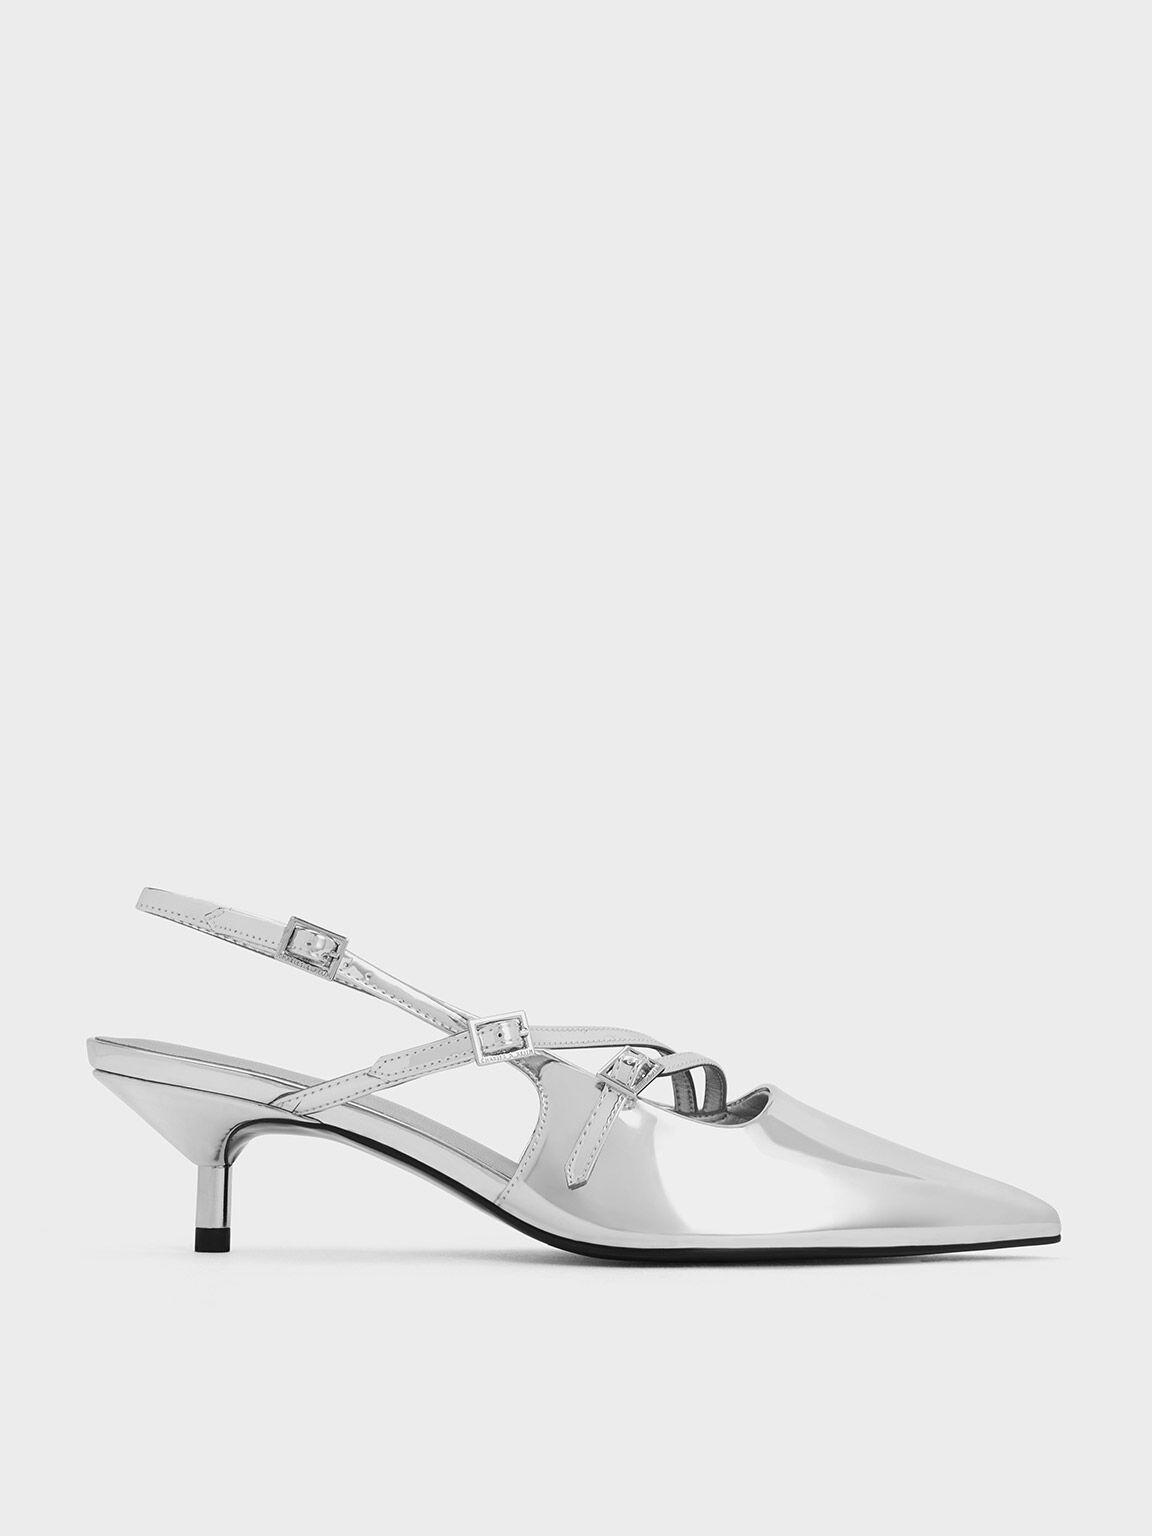 Charles & Keith Sling Back Statement Heeled Shoes in Silver